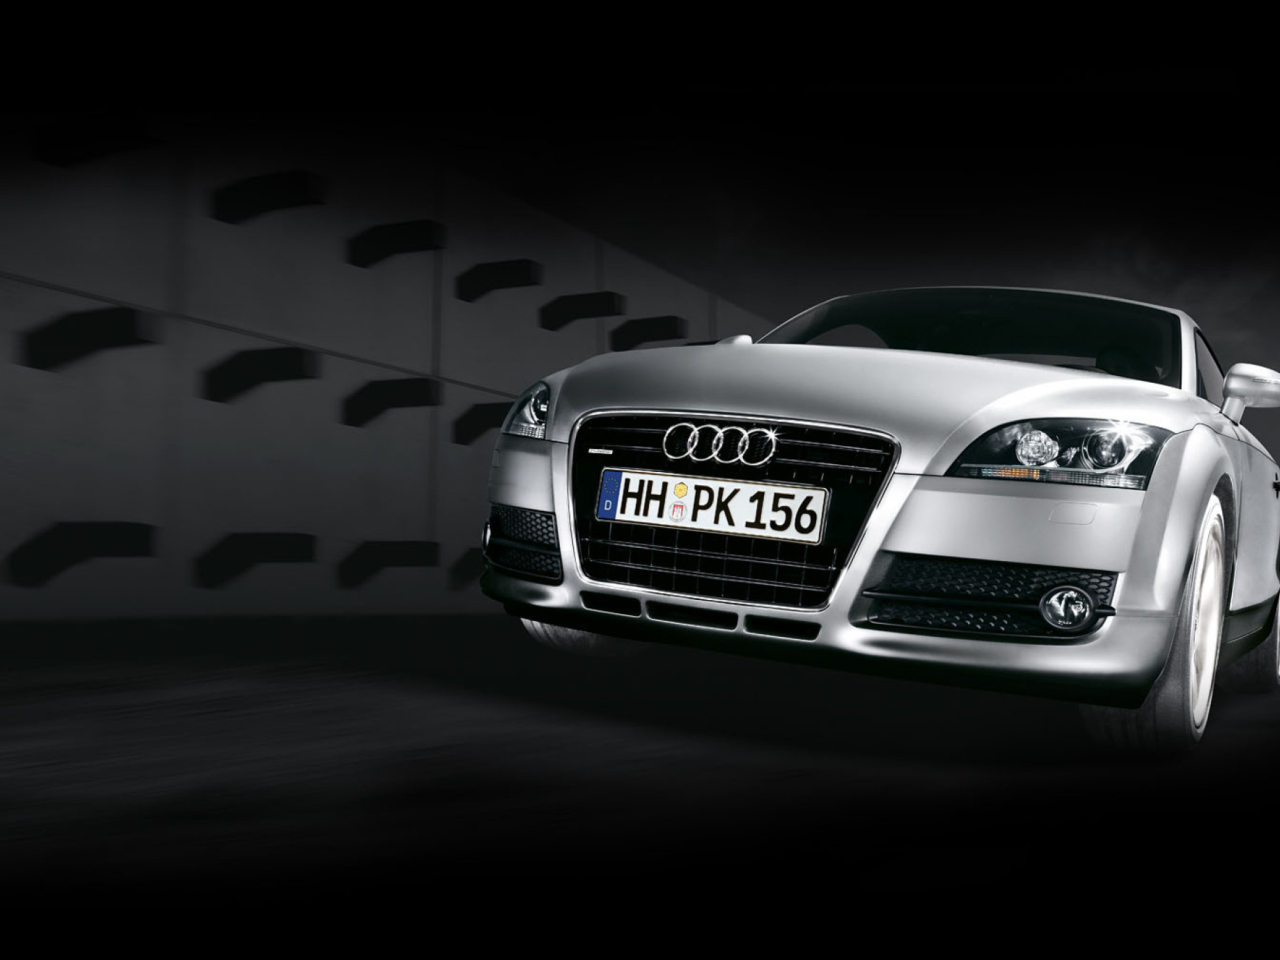 Carro Audi Wallpaper For Android 1280x960